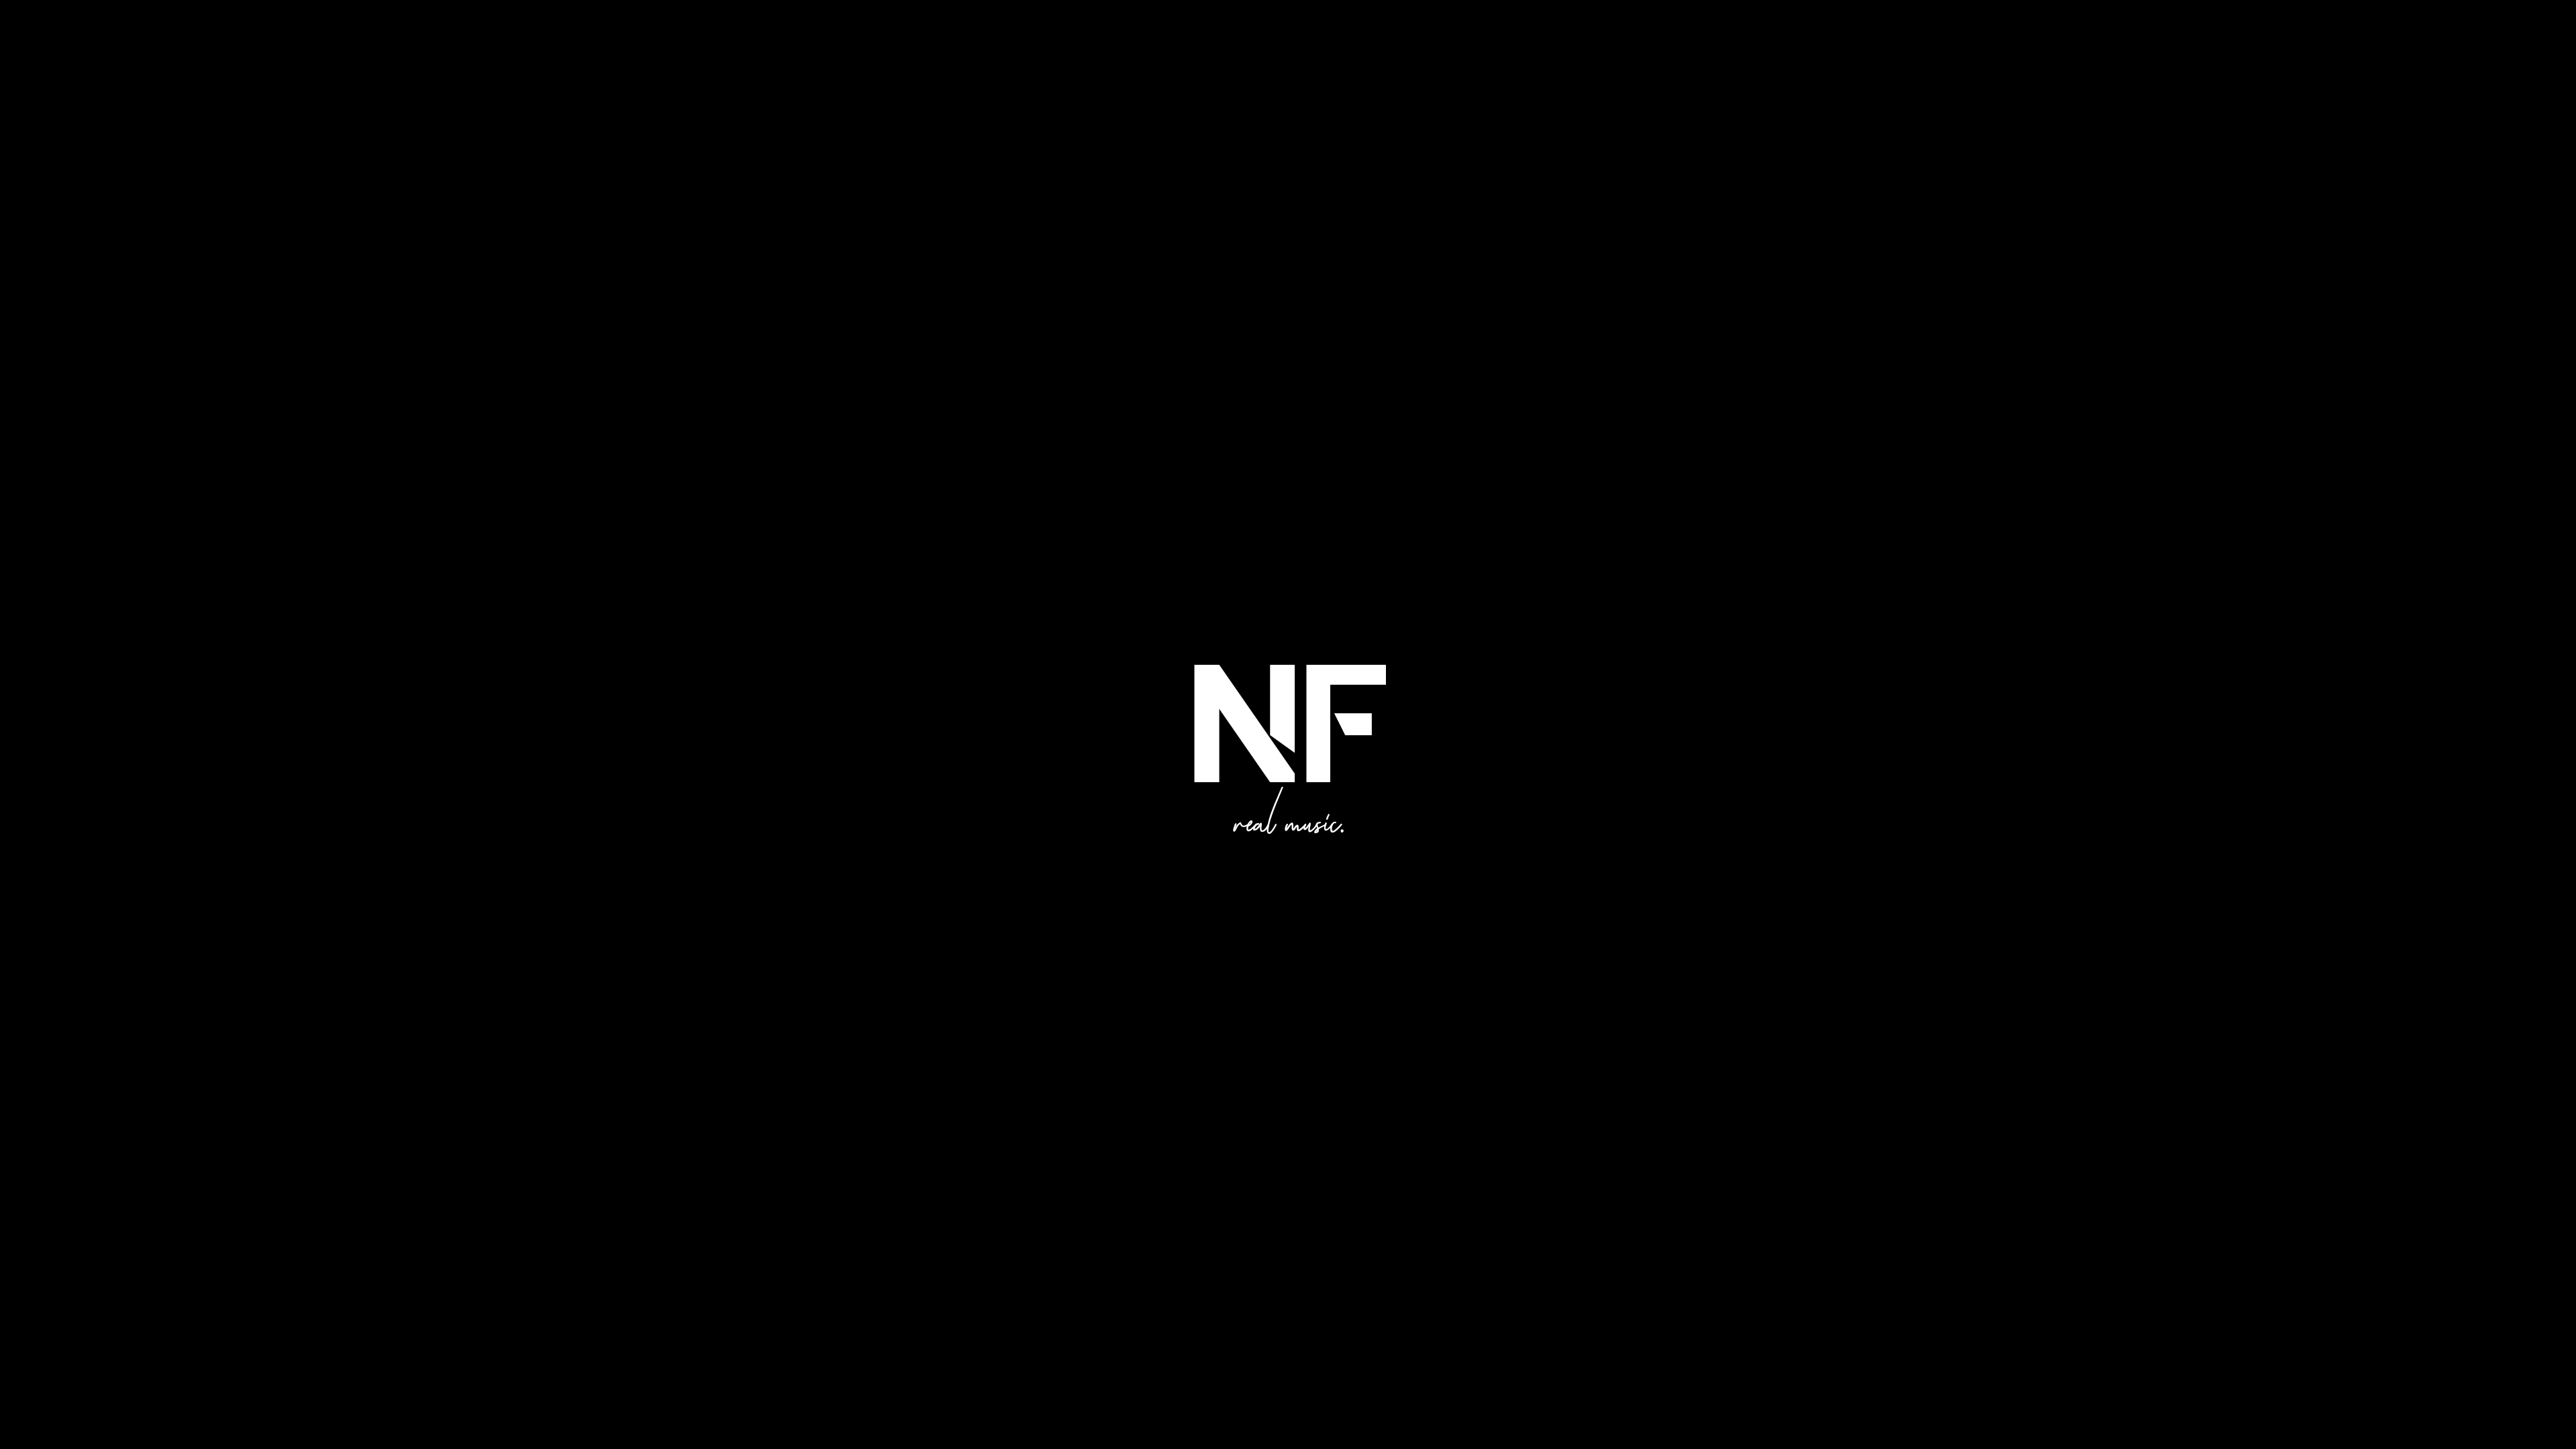 Nf Wallpapers